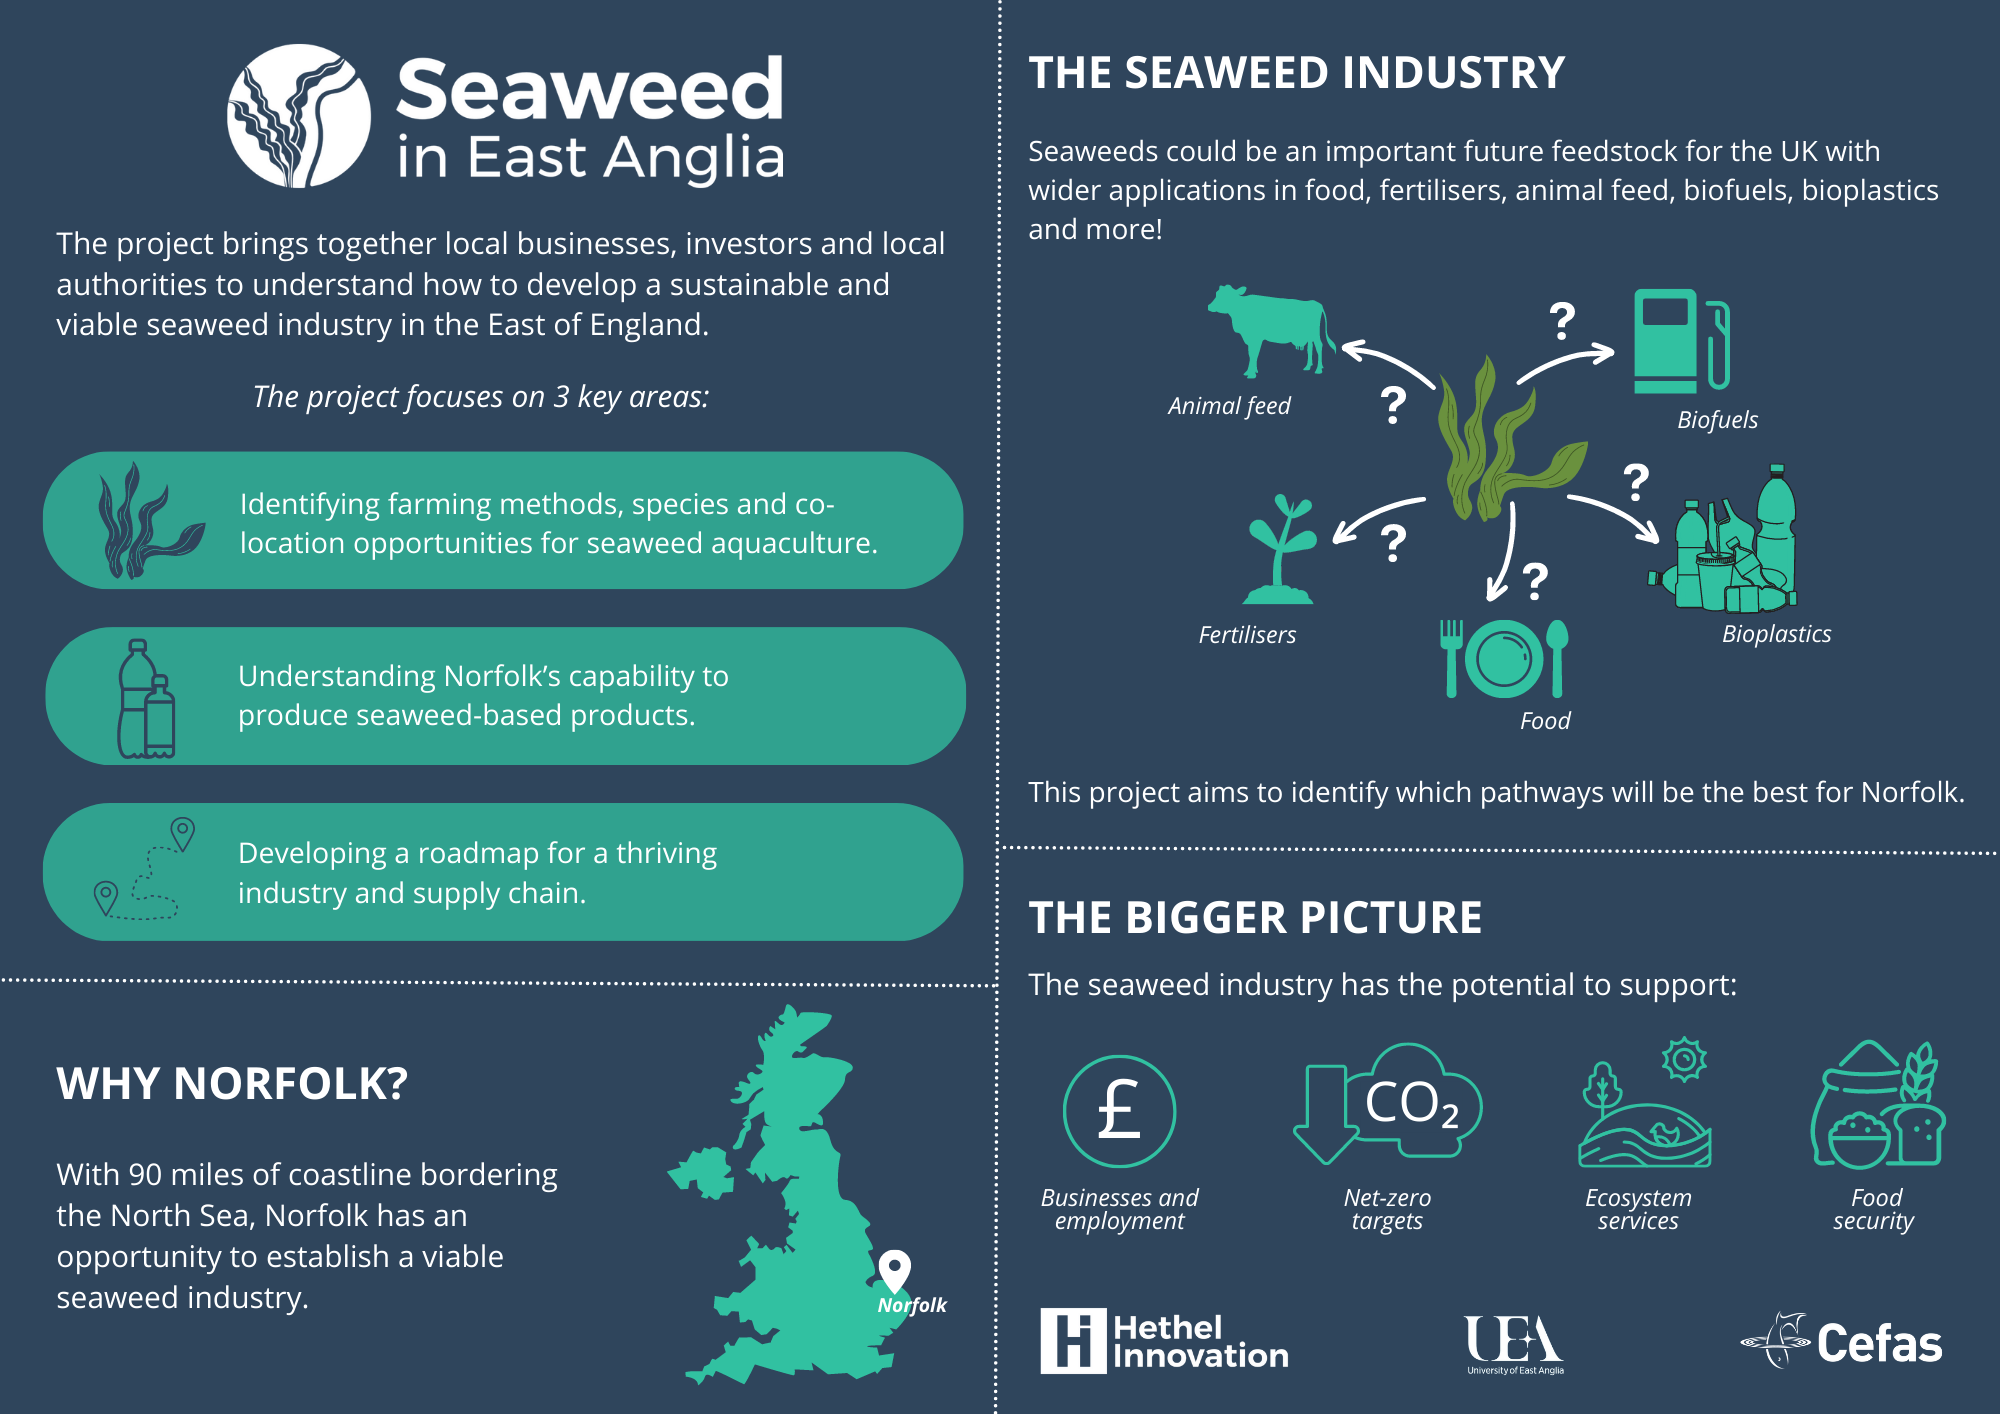 Seaweed in East Anglia project infographic - Credit: Cefas